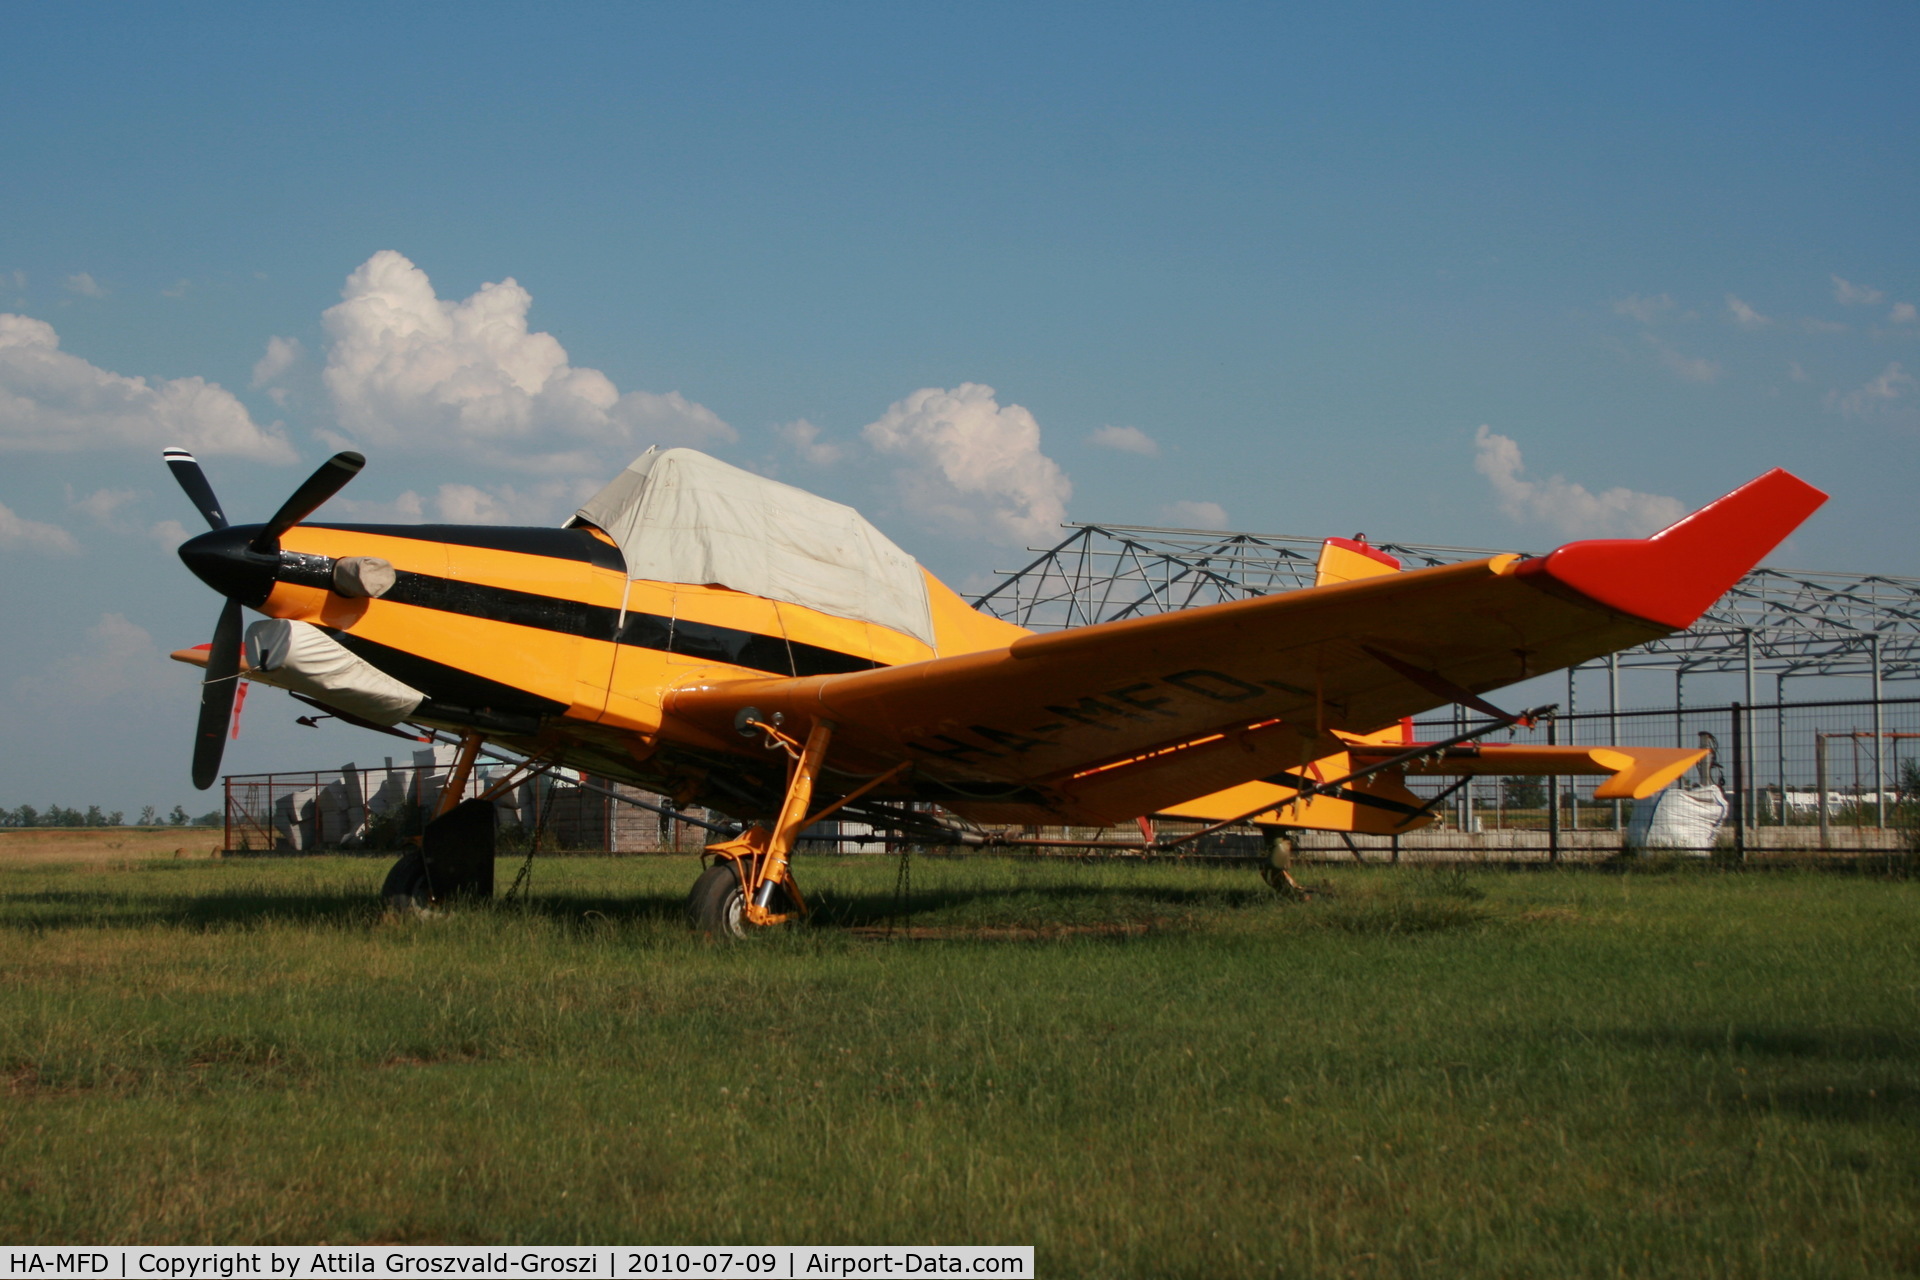 HA-MFD, 1989 Let Z-137T Agro-Turbo C/N 034, Jászapáti agricultural airport - Hungary. With the new painting